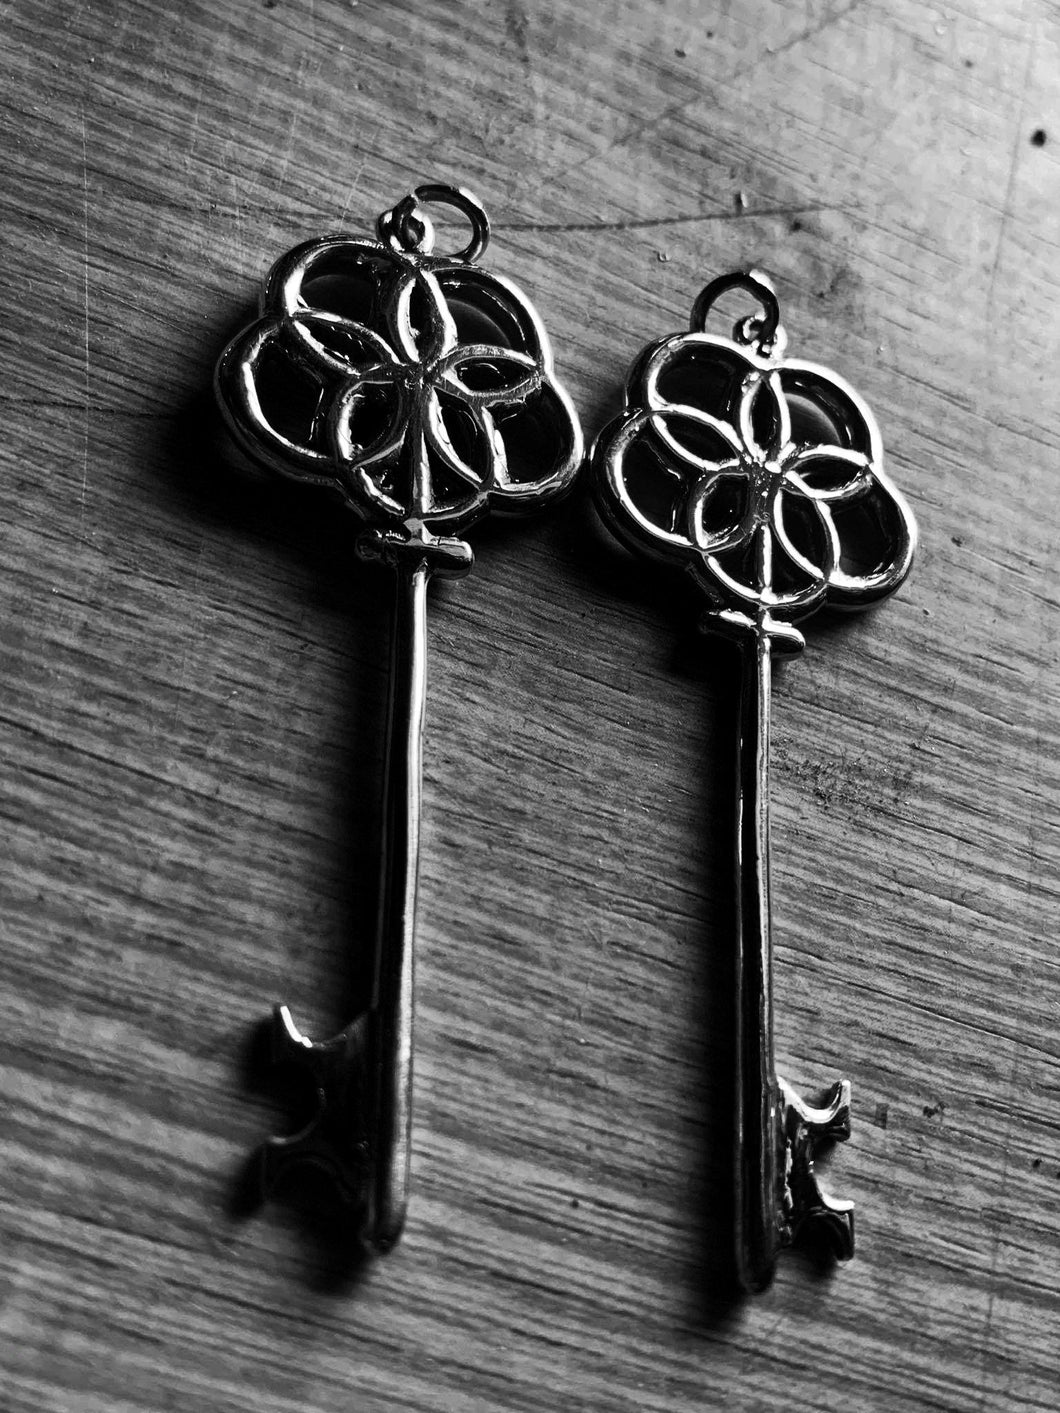 two kings of alchemy  skeleton keys with egg of life design and no chain on table in black and white